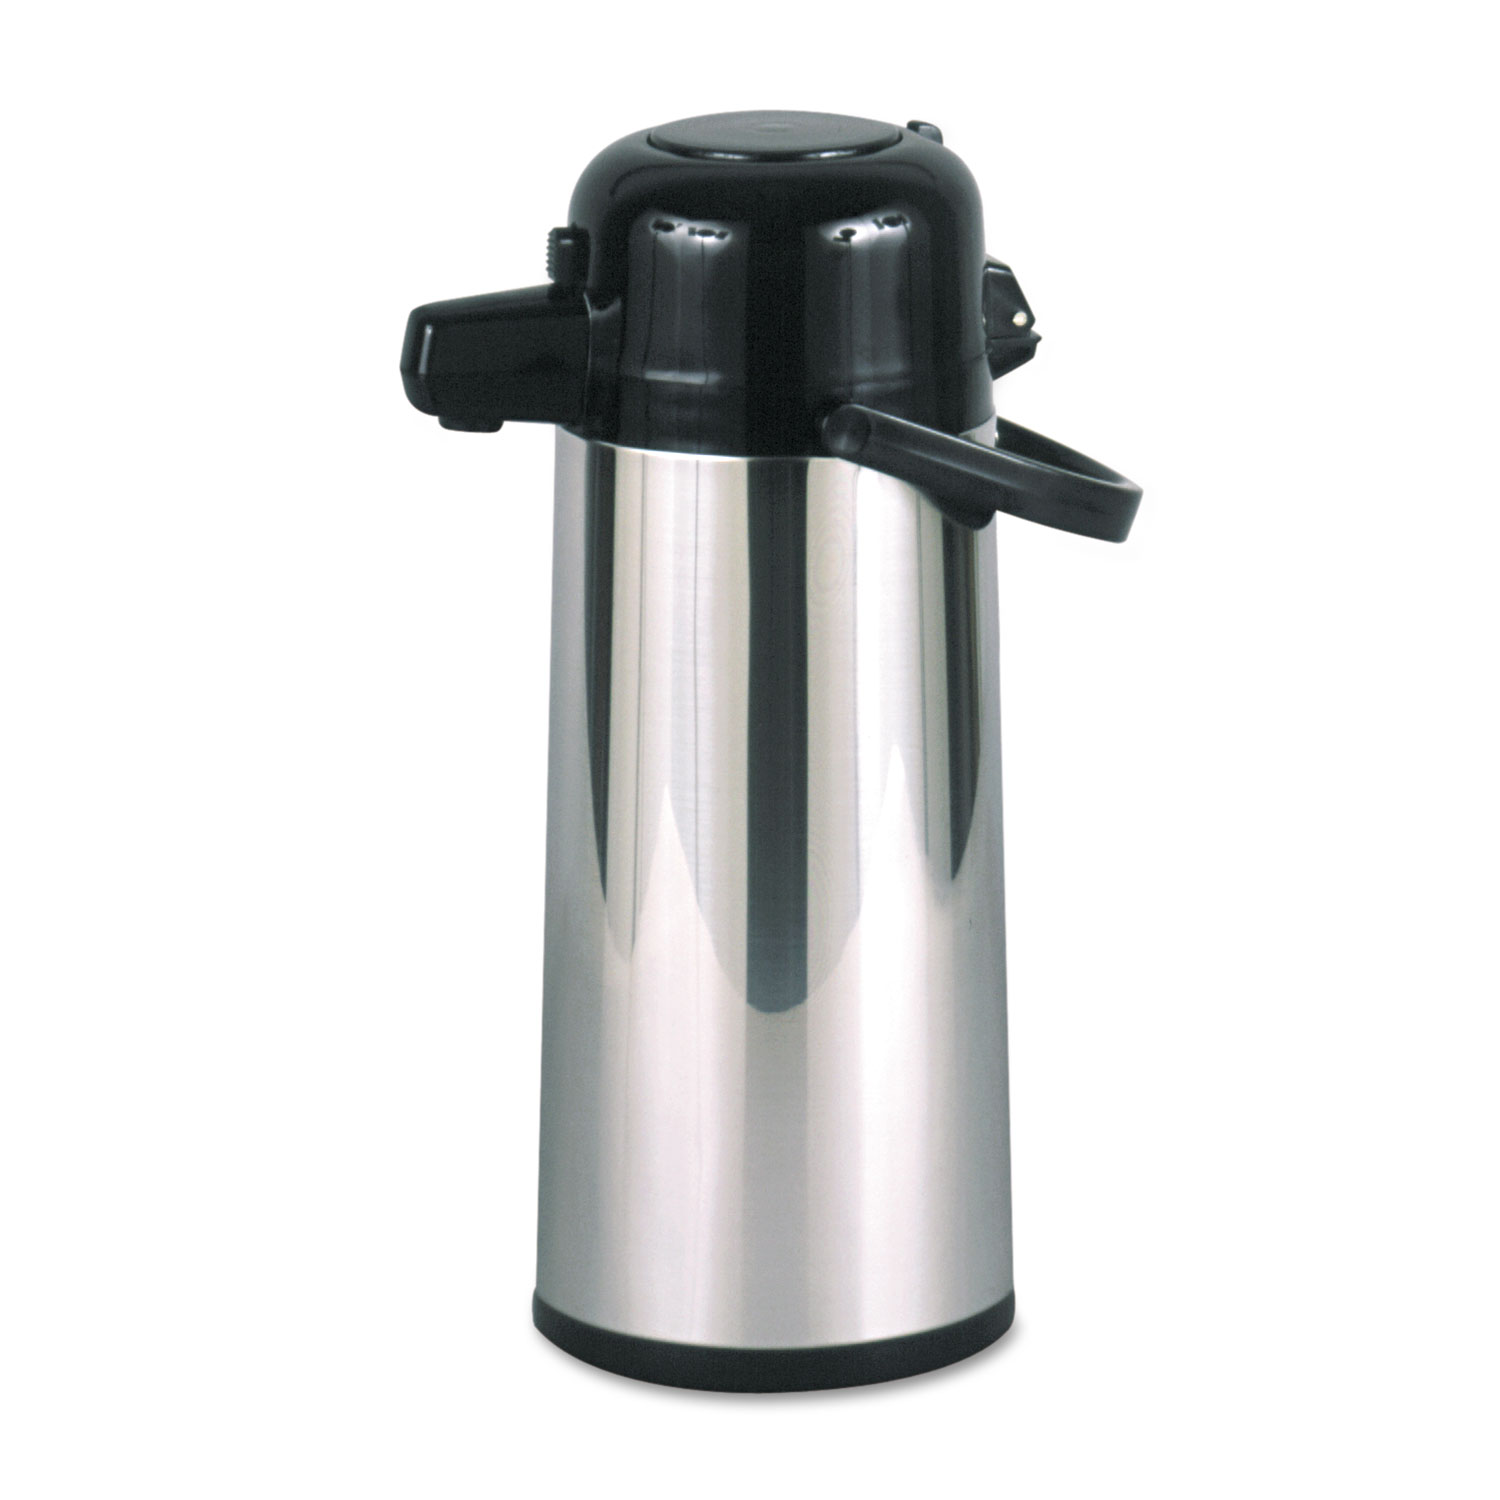  Hormel PAE-22B Commercial Grade 2.2L Airpot, w/Push-Button Pump, Stainless Steel/Black (HORPAE22B) 